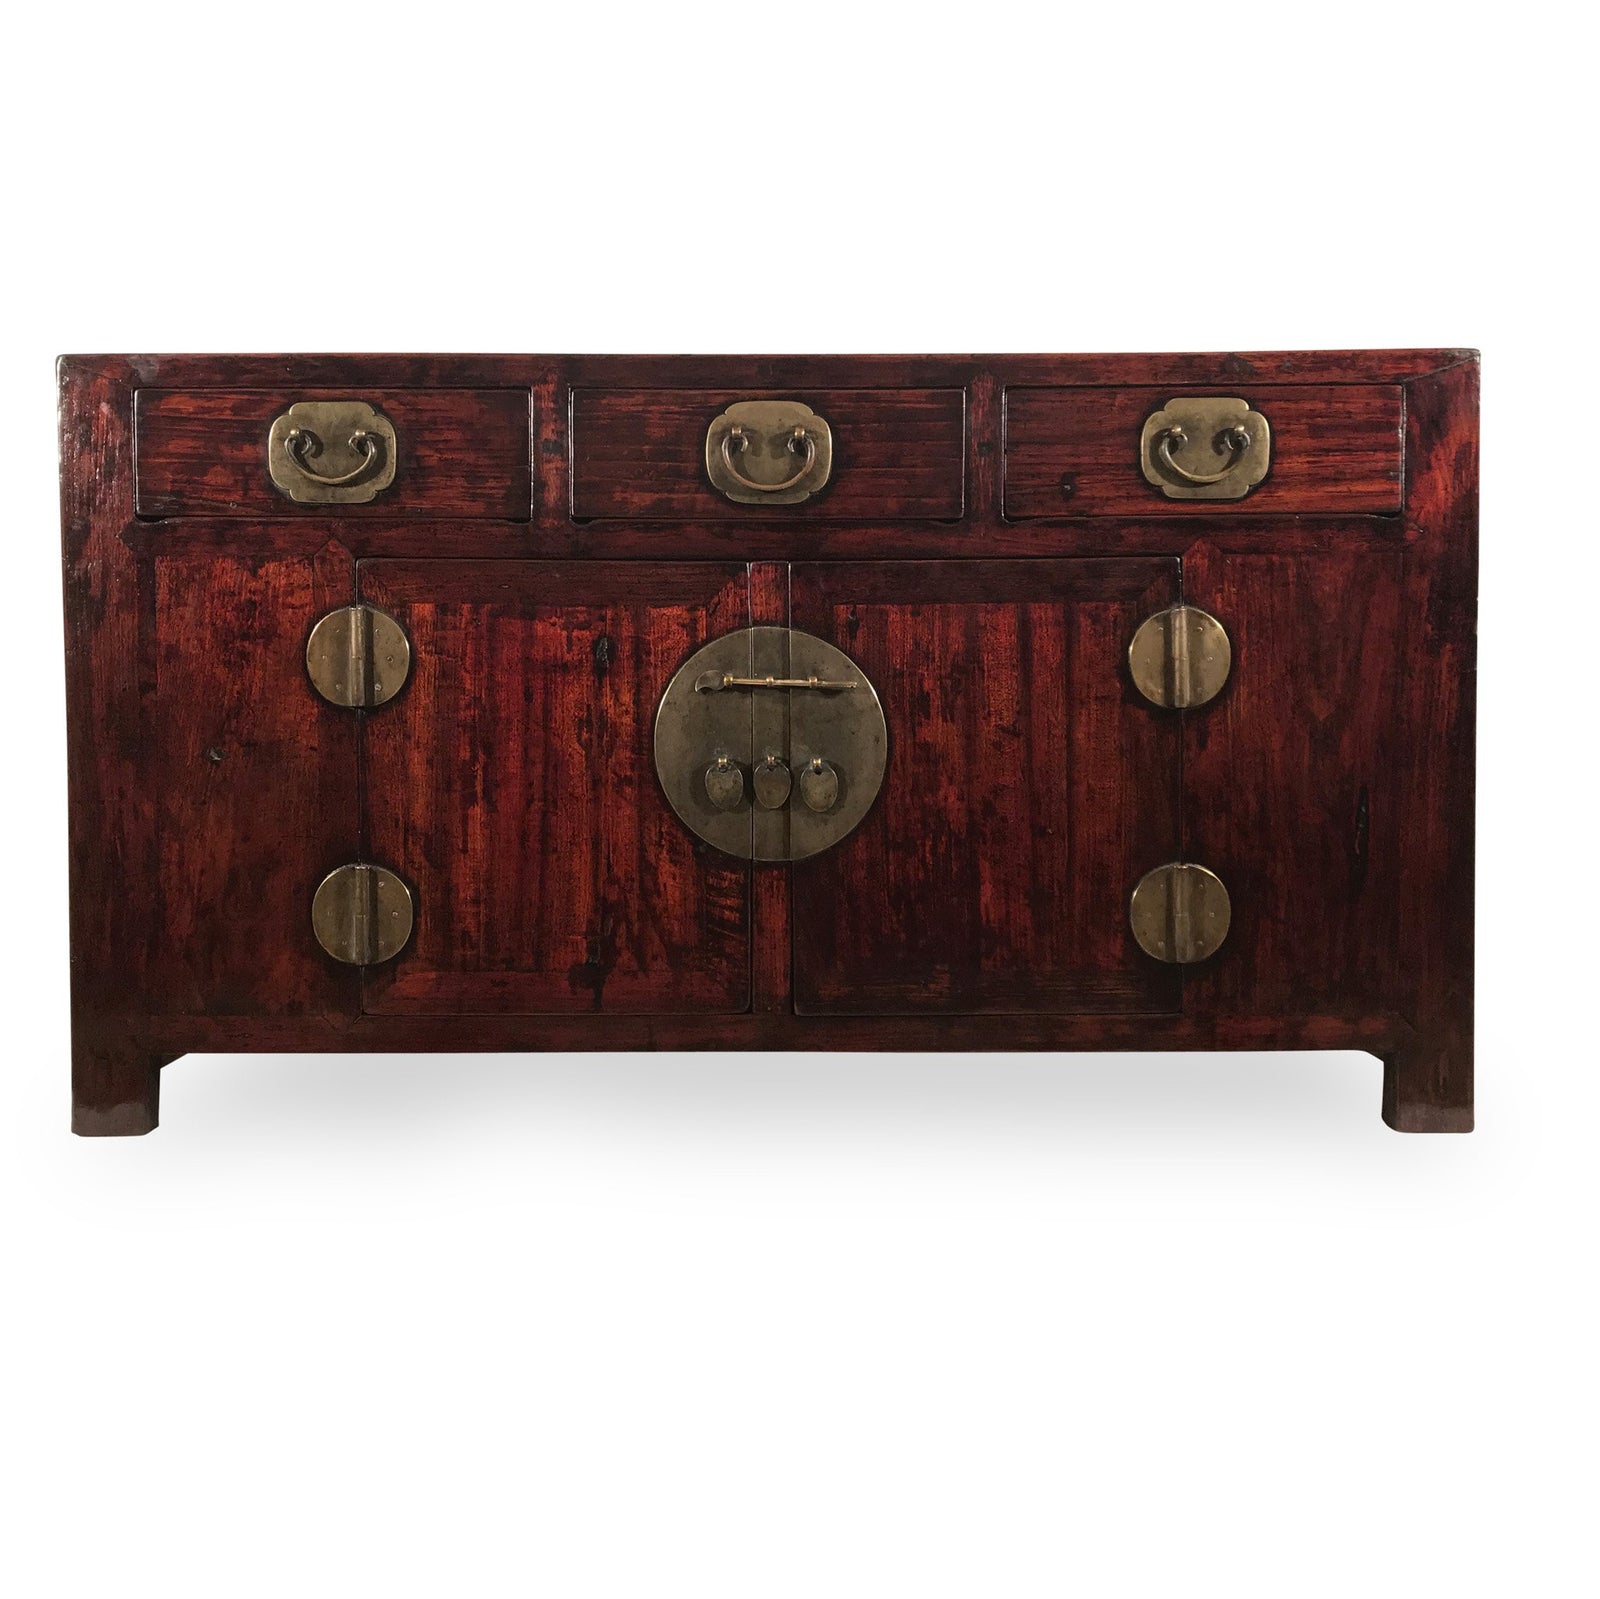 Sideboard from Tianjin - Elm - 19thC - 158 x 97 x 88 (wxdxh cms) - C1258